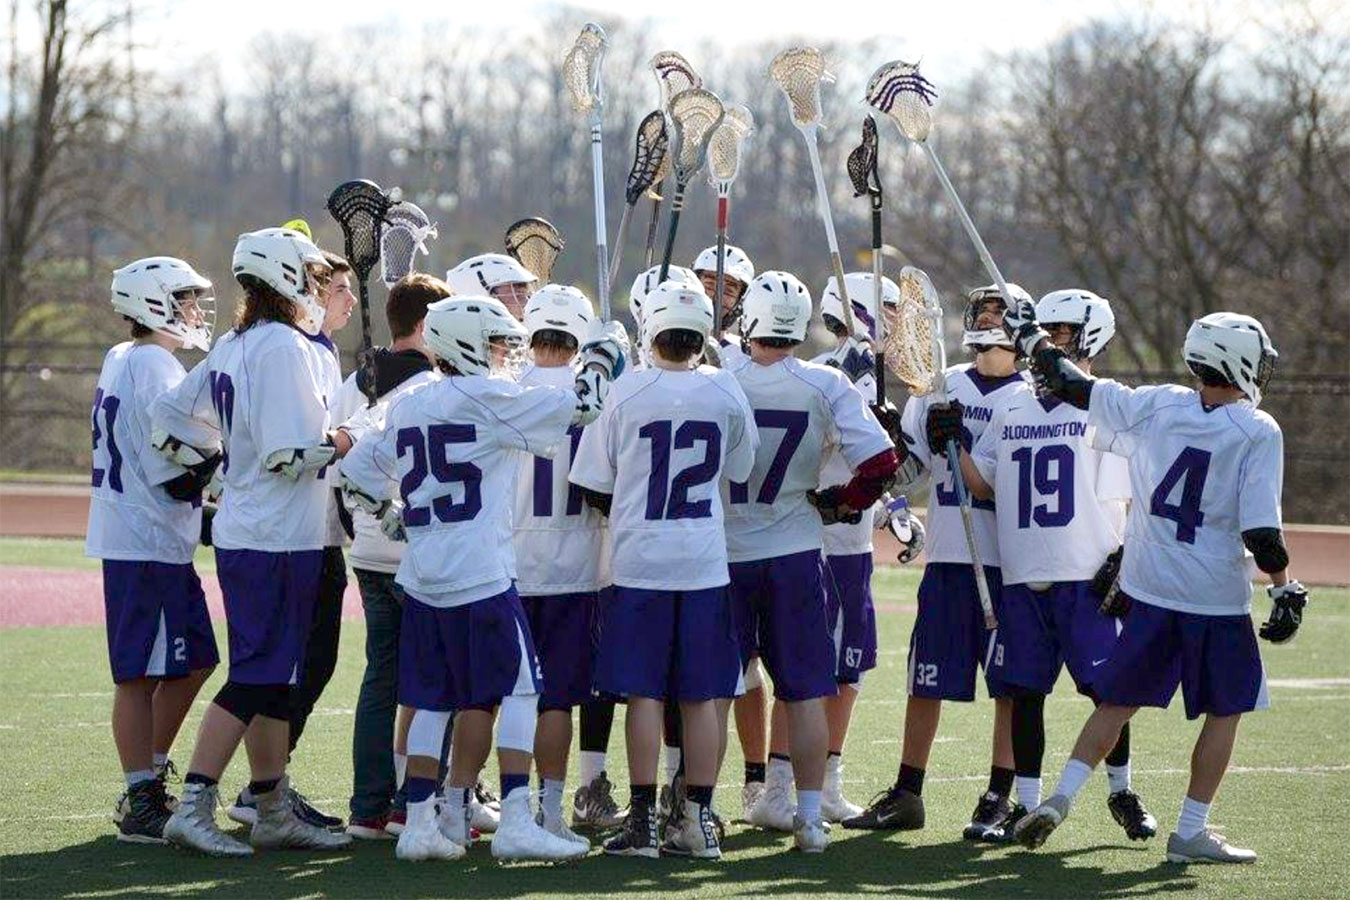 A game with ancient origins, lacrosse is gaining momentum in Bloomington, as many parents consider it an alternative to more dangerous sports for youth. Bloomington has a number of options for youth lacrosse, including Bloomington South (pictured here), Bloomington North, Pride Girls' Lacrosse, and Bloomington Middle School Lacrosse. | Courtesy photo